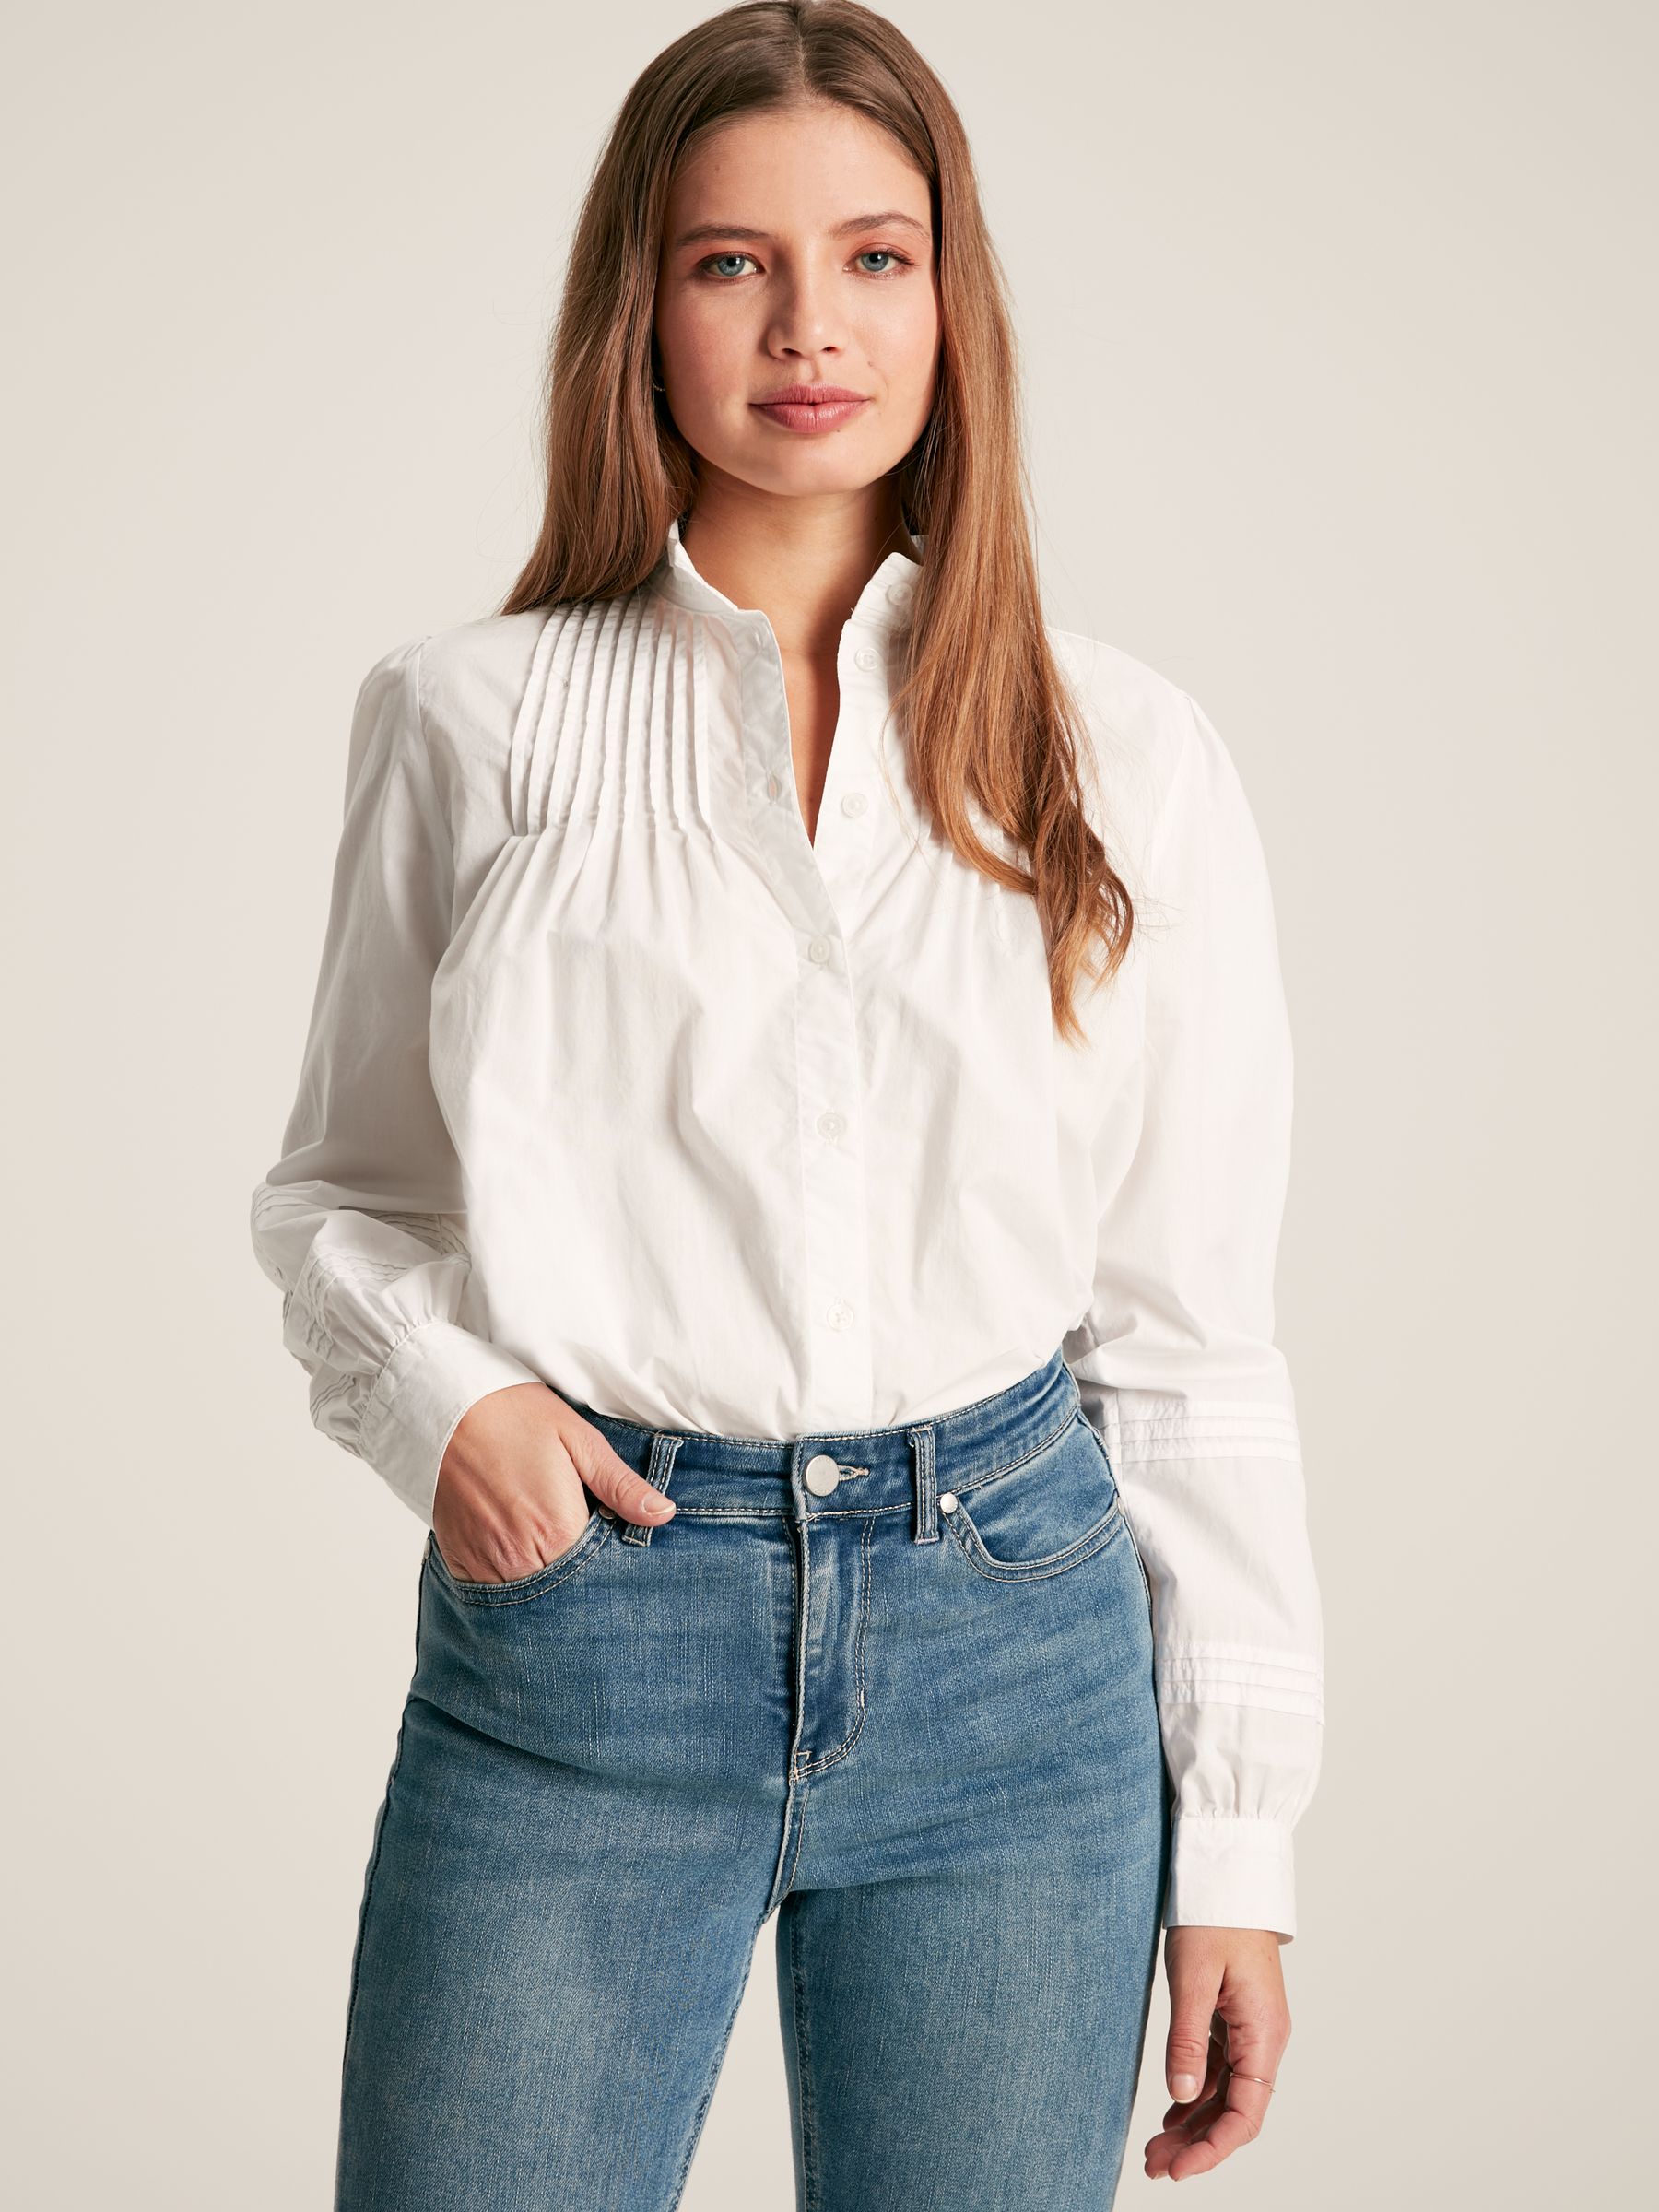 Buy Arabella Chalk White Pleated Blouse from the Joules online shop